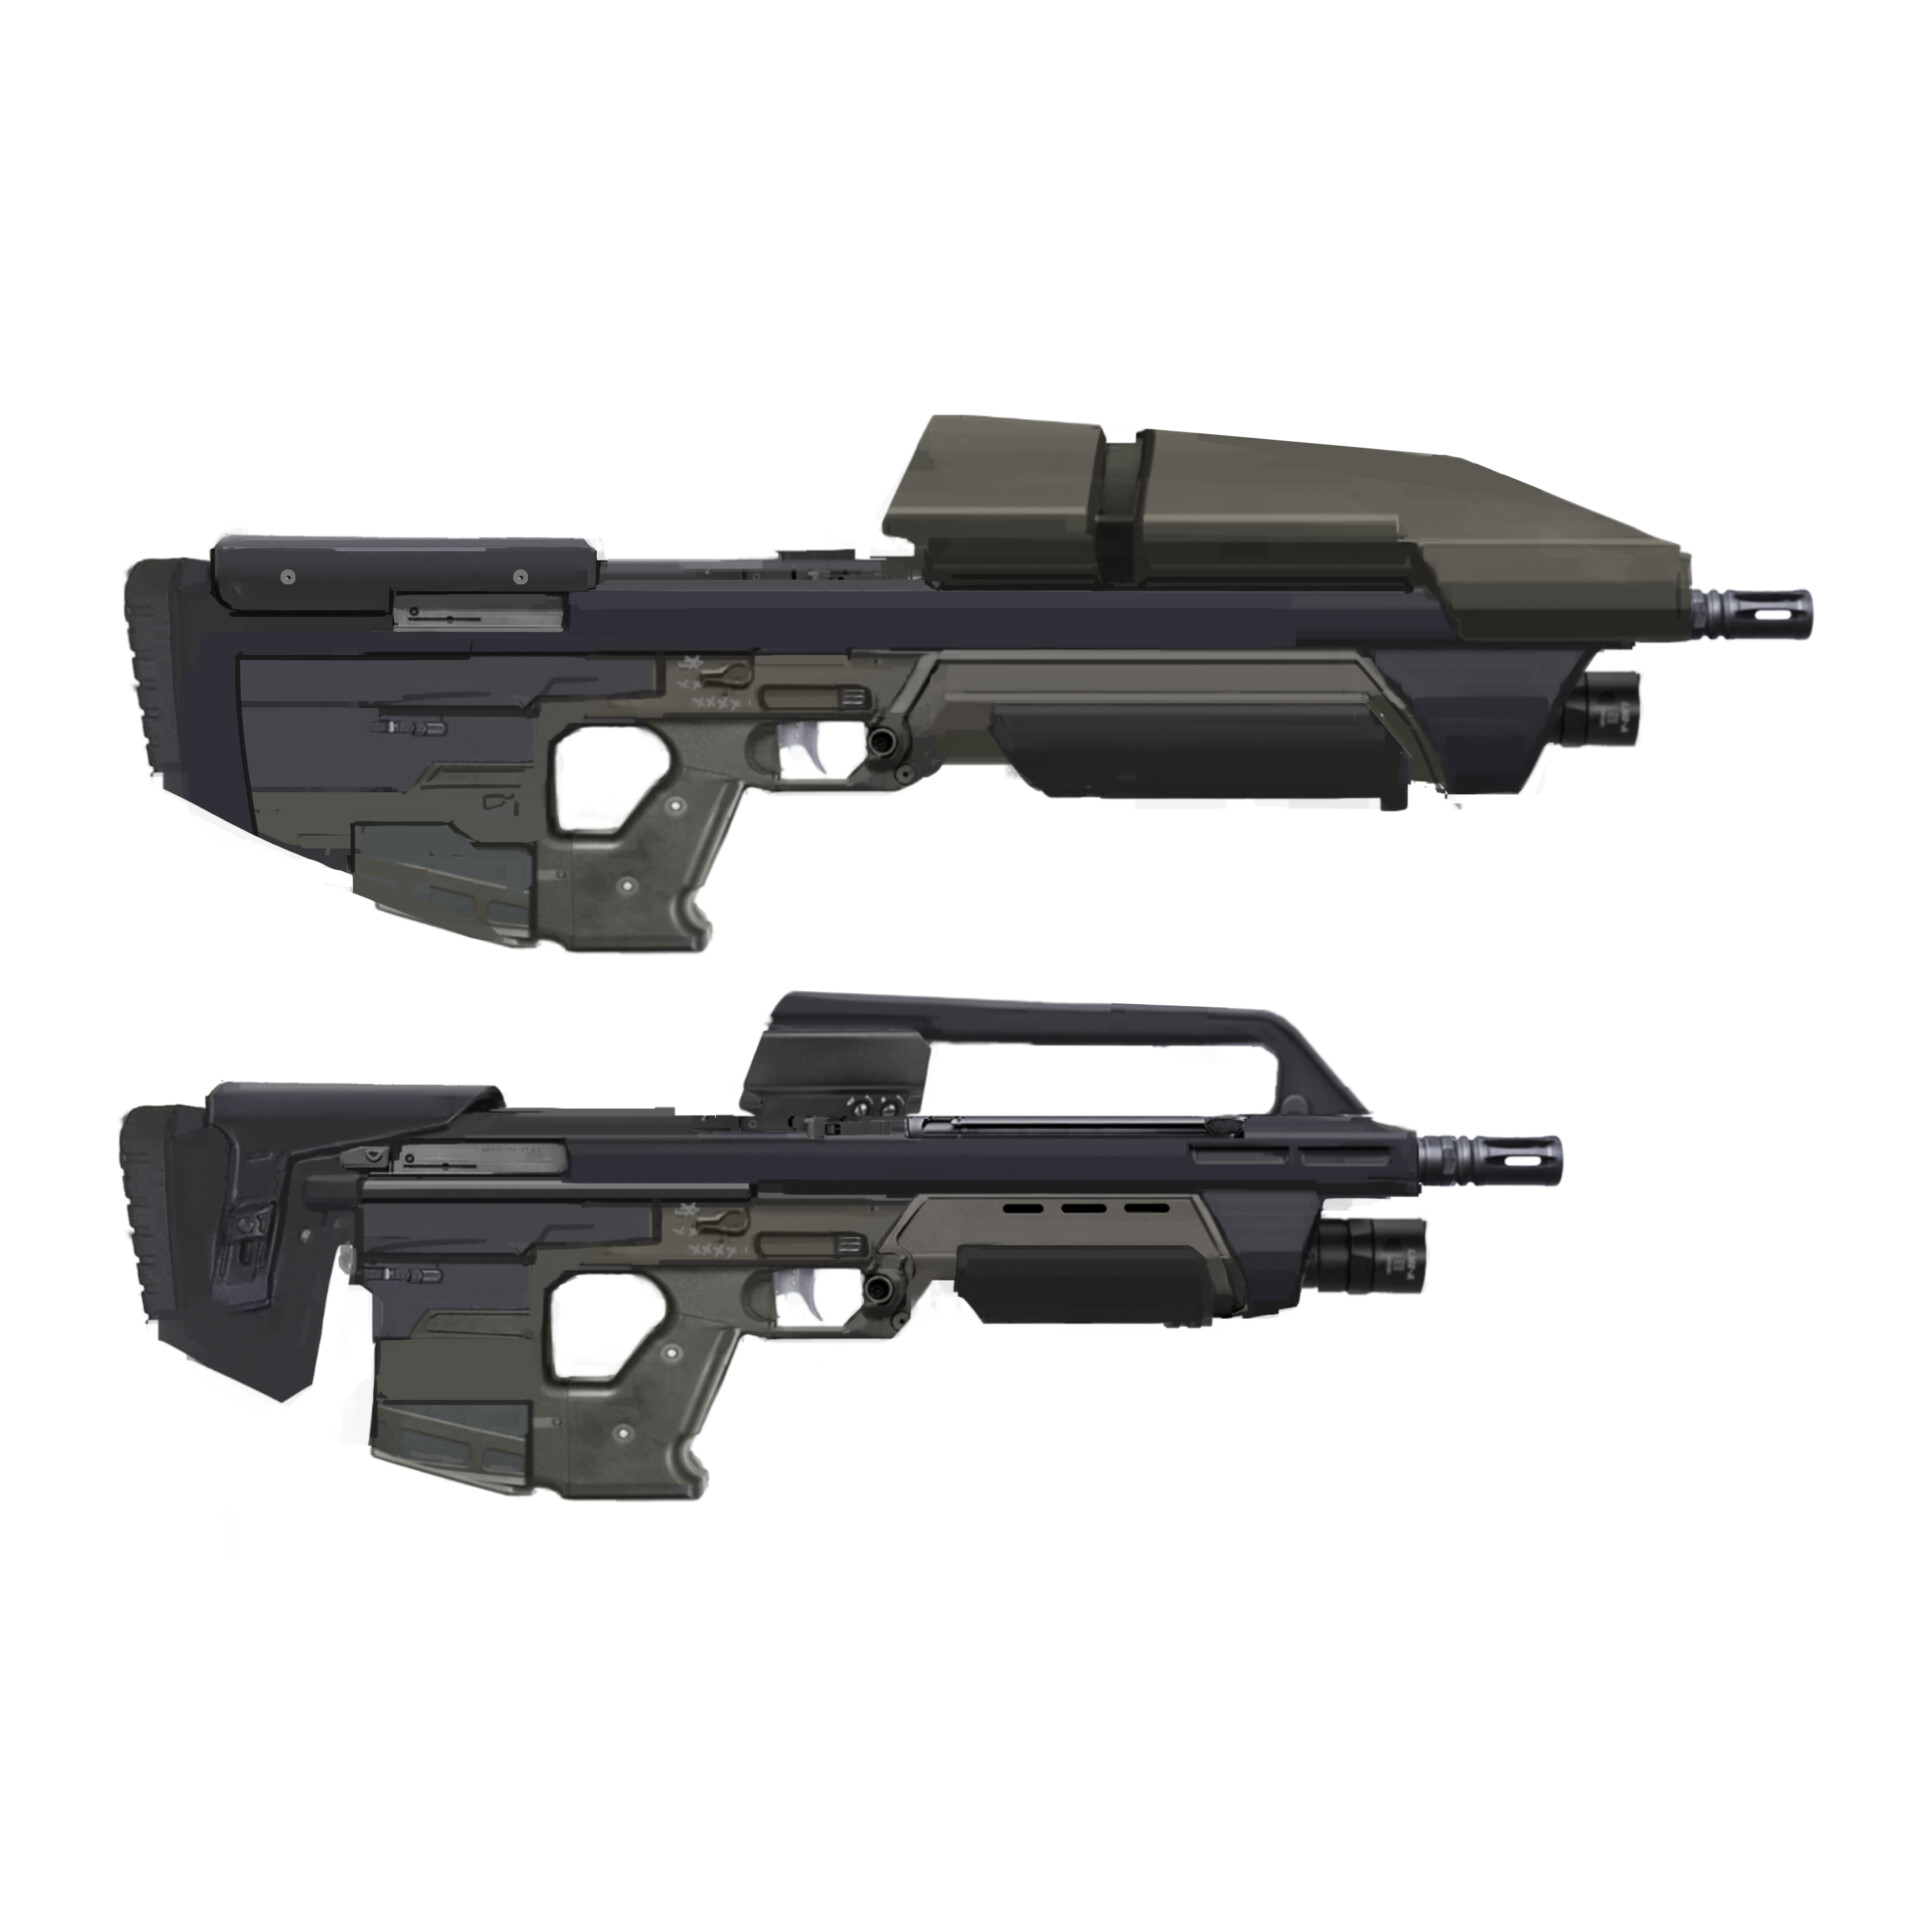 Halo 3 Odst Weapons